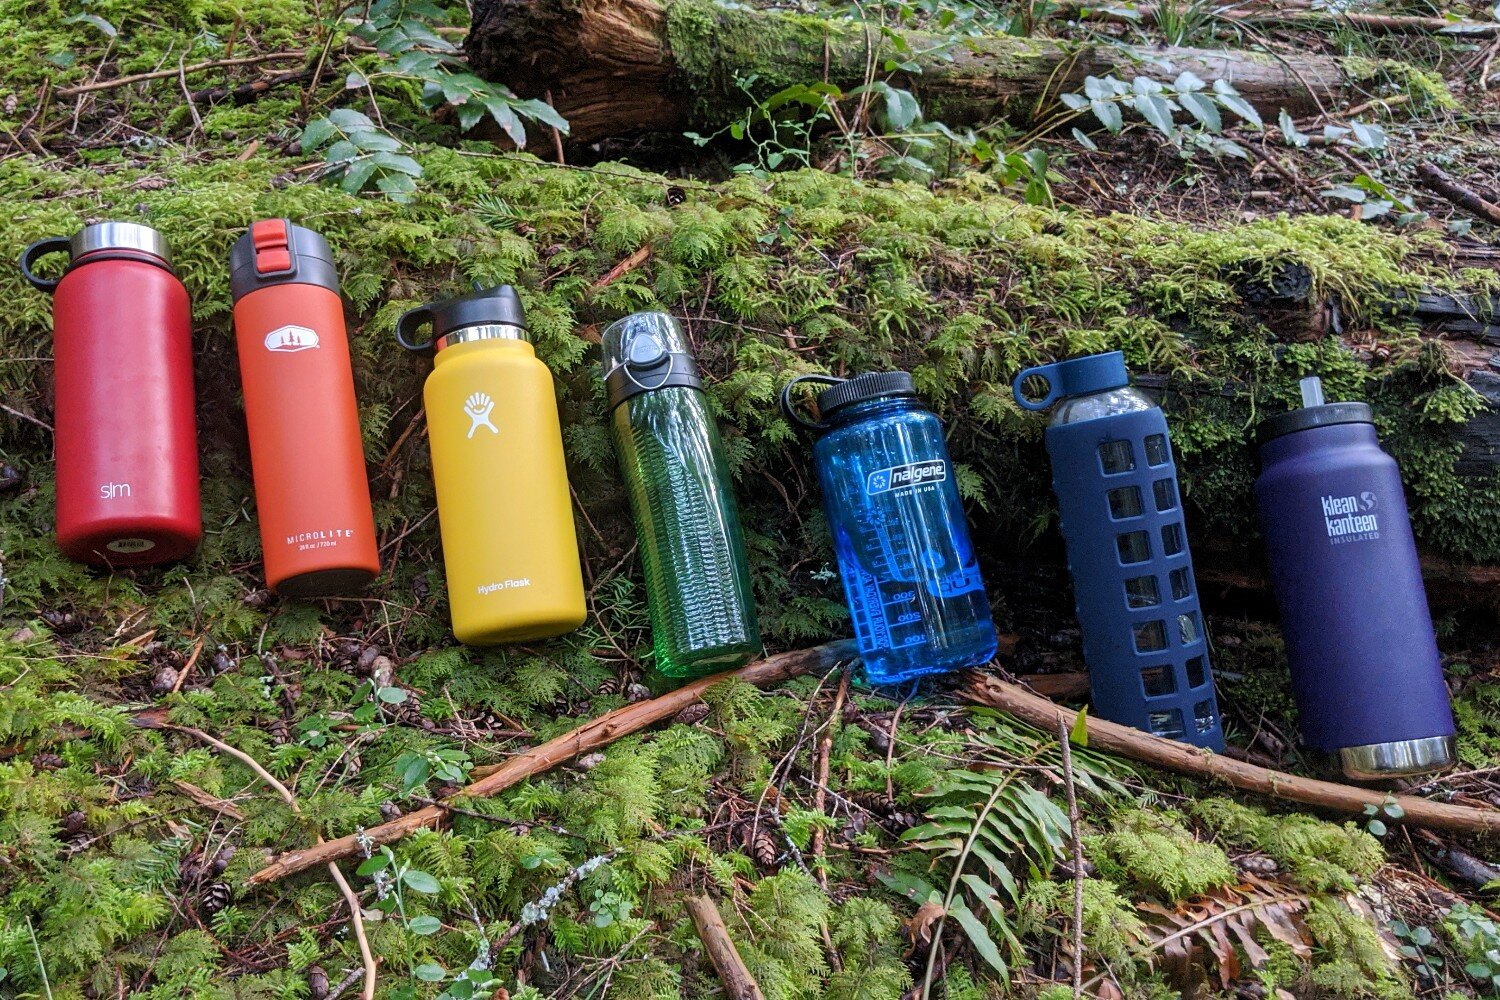 Water bottles come in all different shapes and colors to match your style.